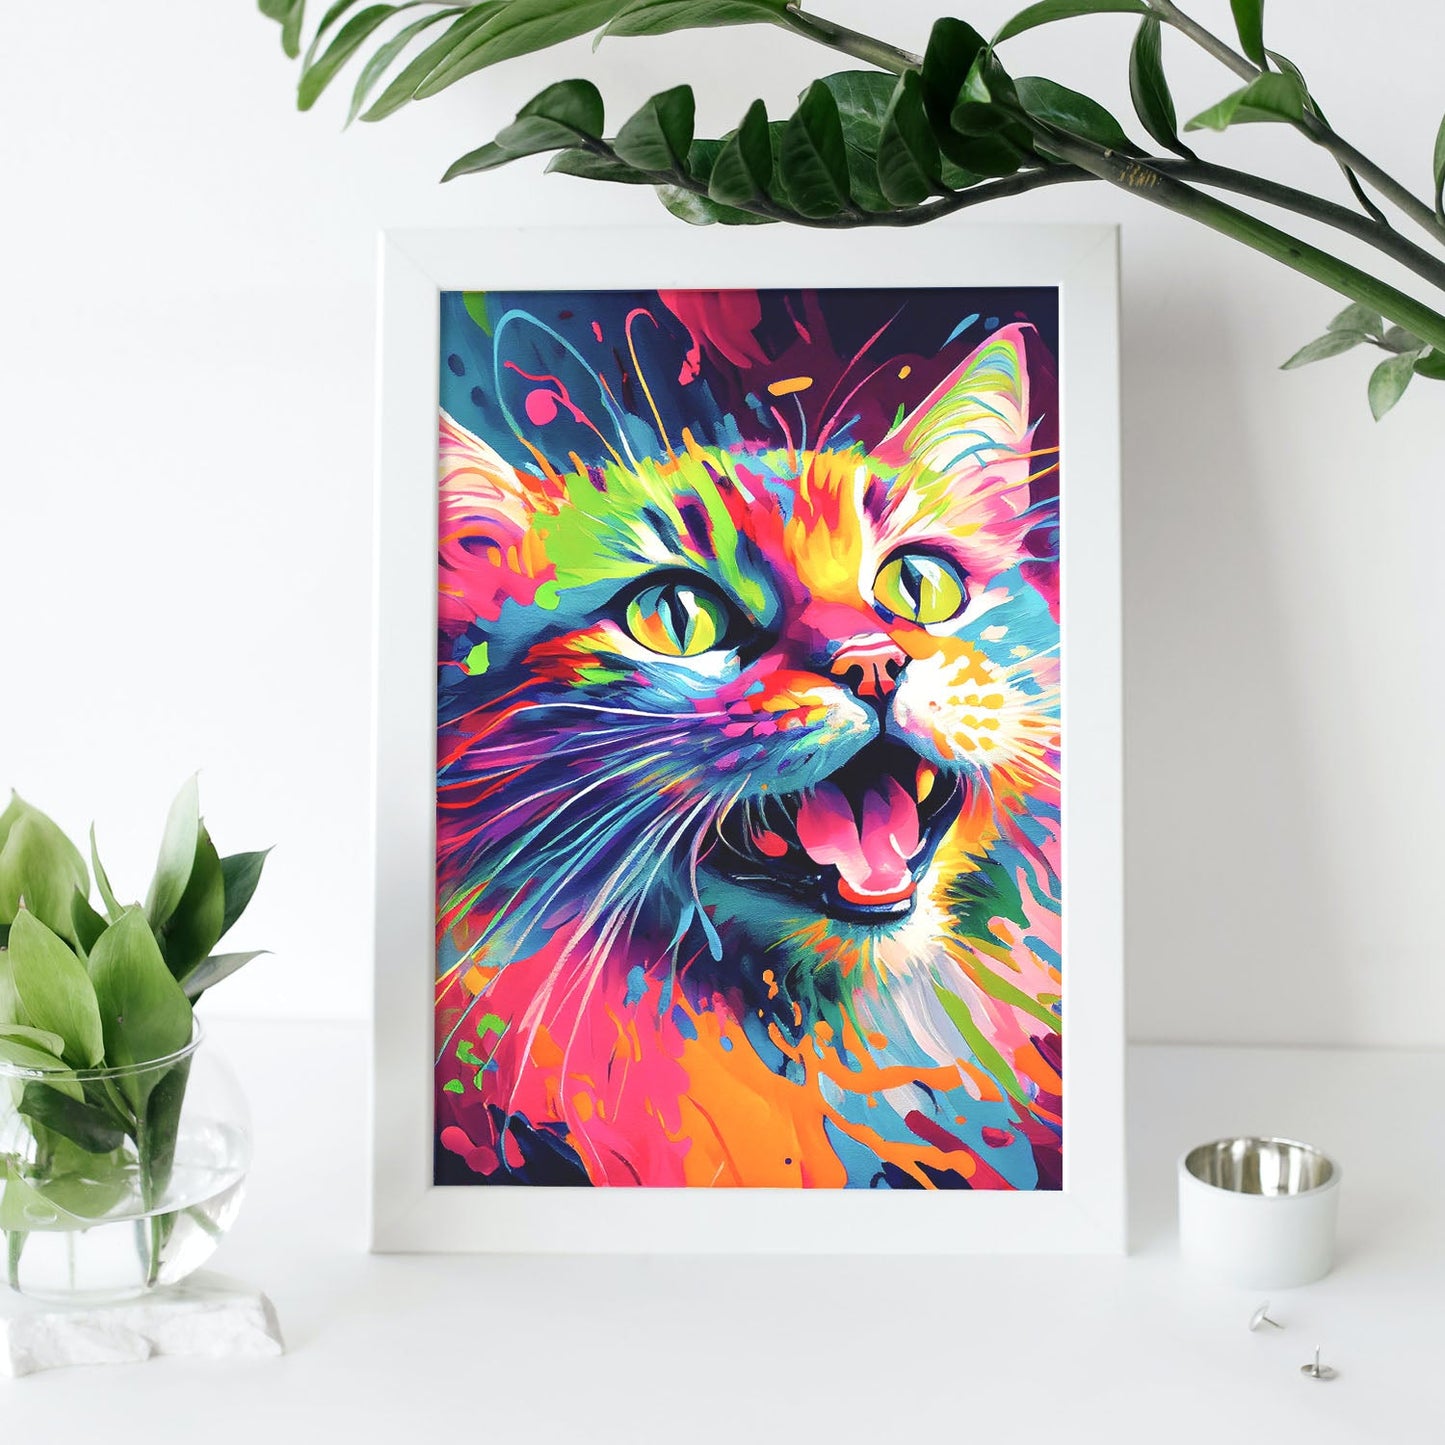 Nacnic Abstract smiling Cat in Lisa Fran Style_3. Aesthetic Wall Art Prints for Bedroom or Living Room Design.